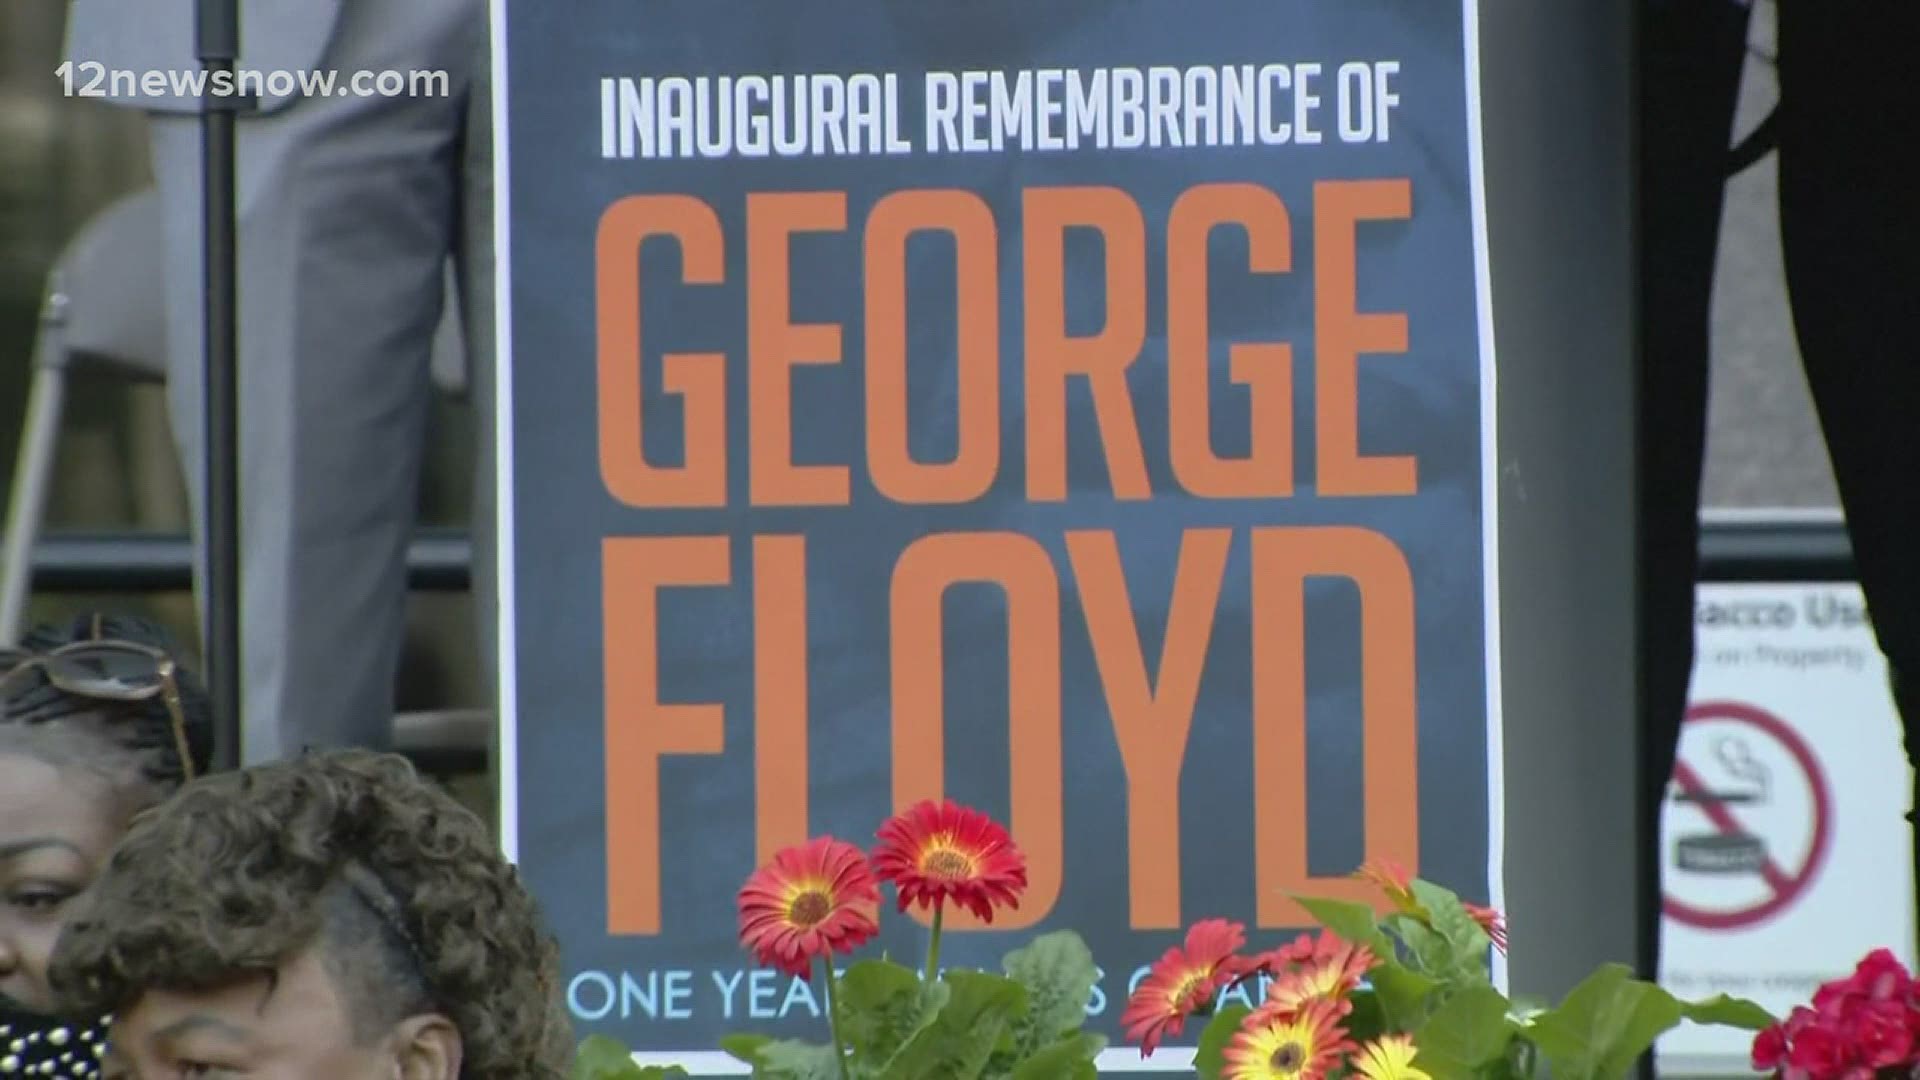 Two Southeast Texas leaders are speaking out after the one year anniversary of George Floyd's death. Both say the good fight is not over just yet.